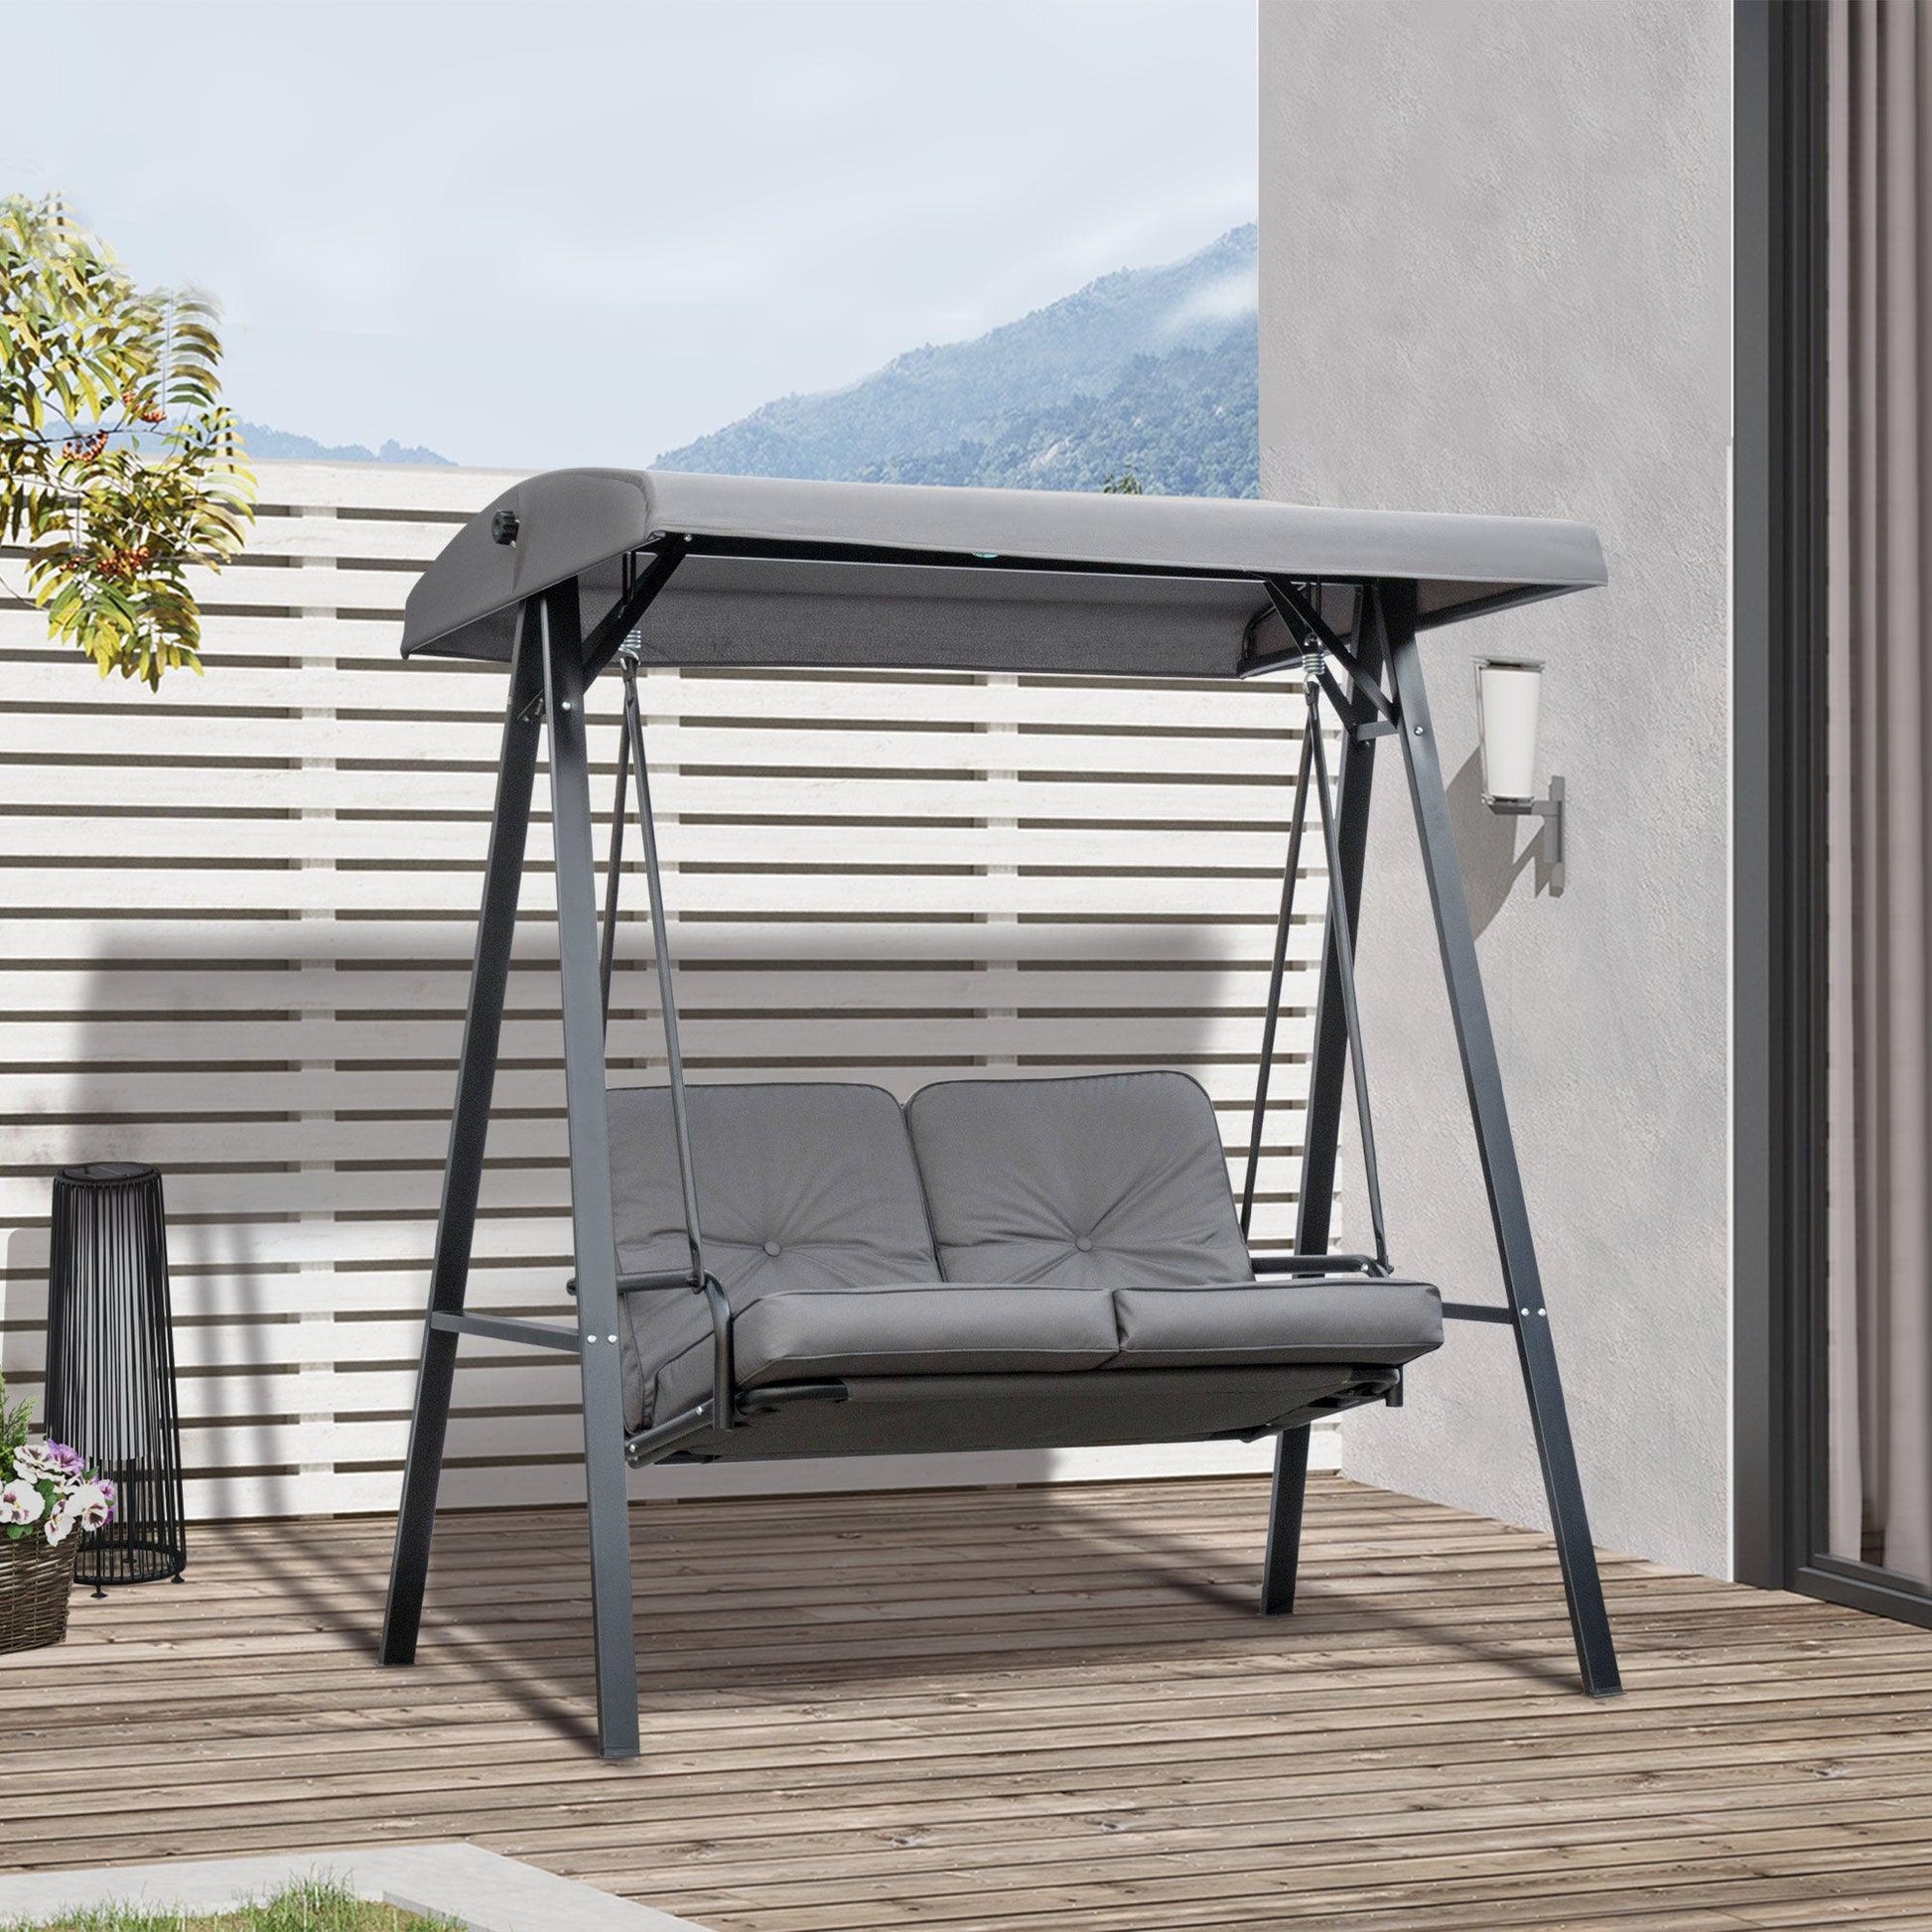 Outsunny Outdoor Swing Chair with Adjustable Canopy - Grey - ALL4U RETAILER LTD